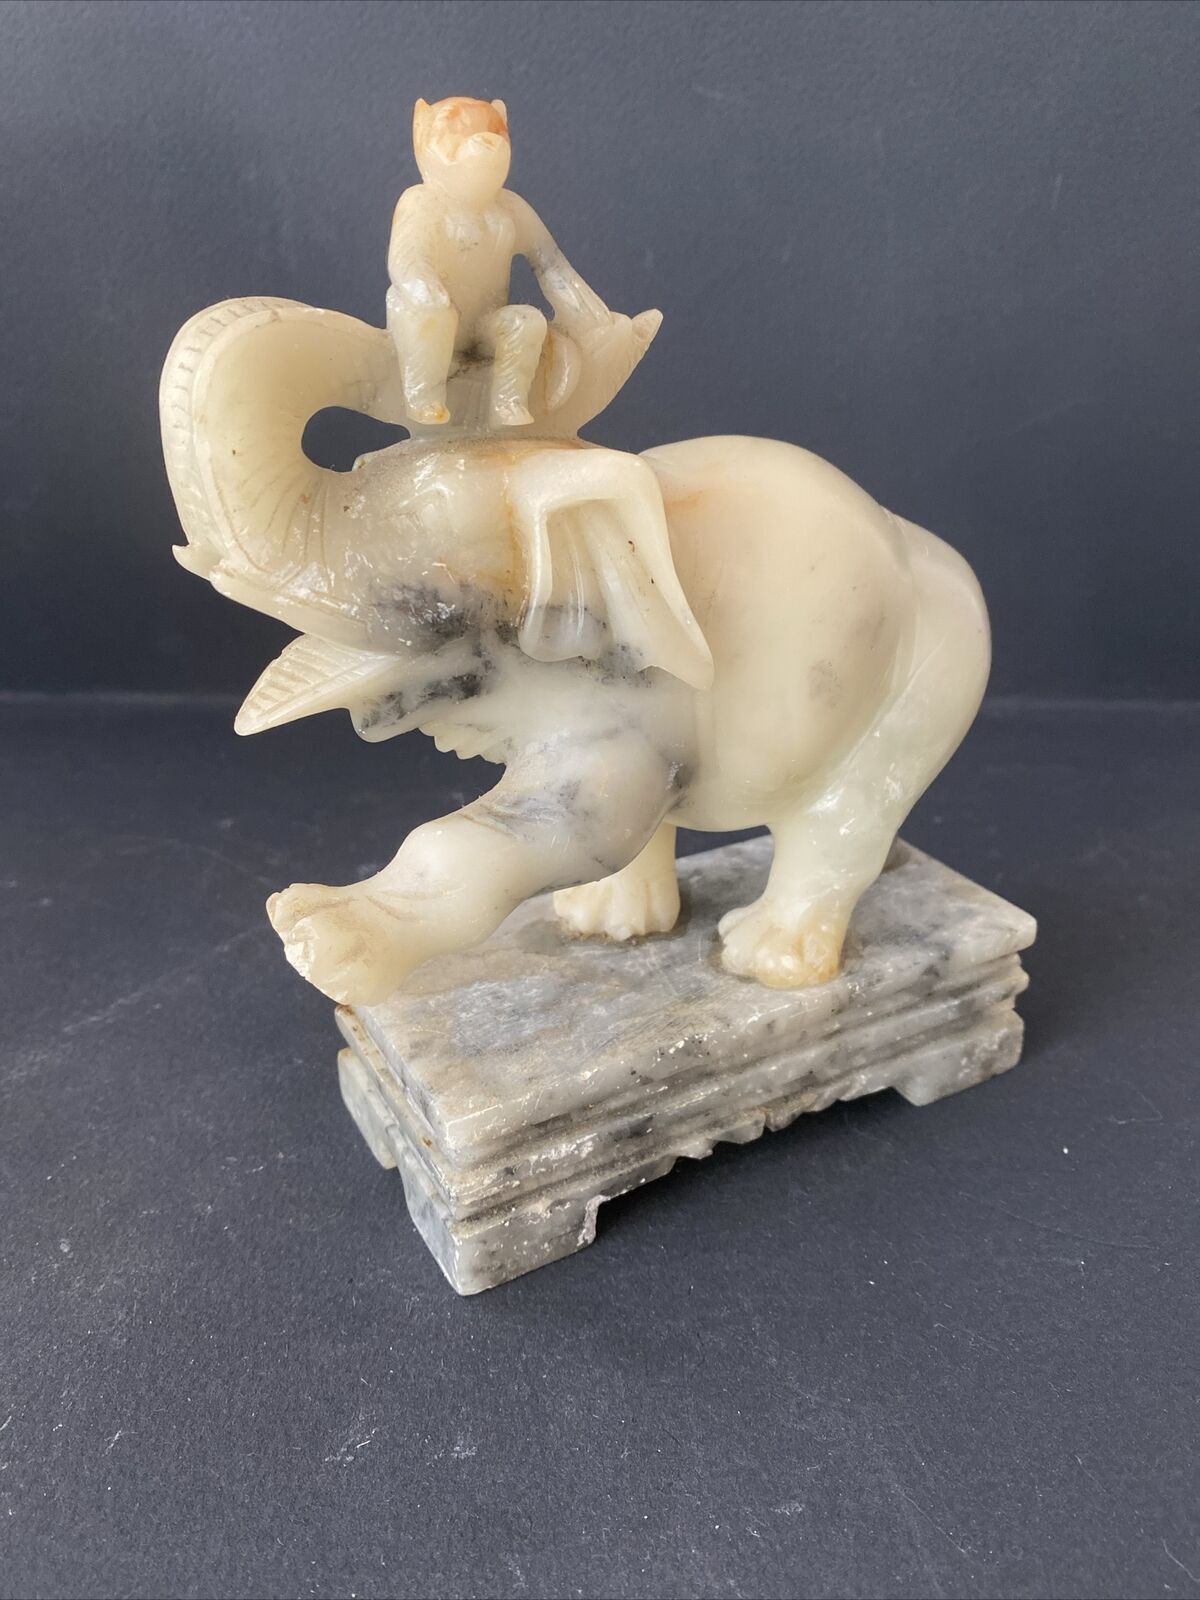 Vintage Stone Carved Elephant With Creature On Head. Chinese Jade, Marble? 